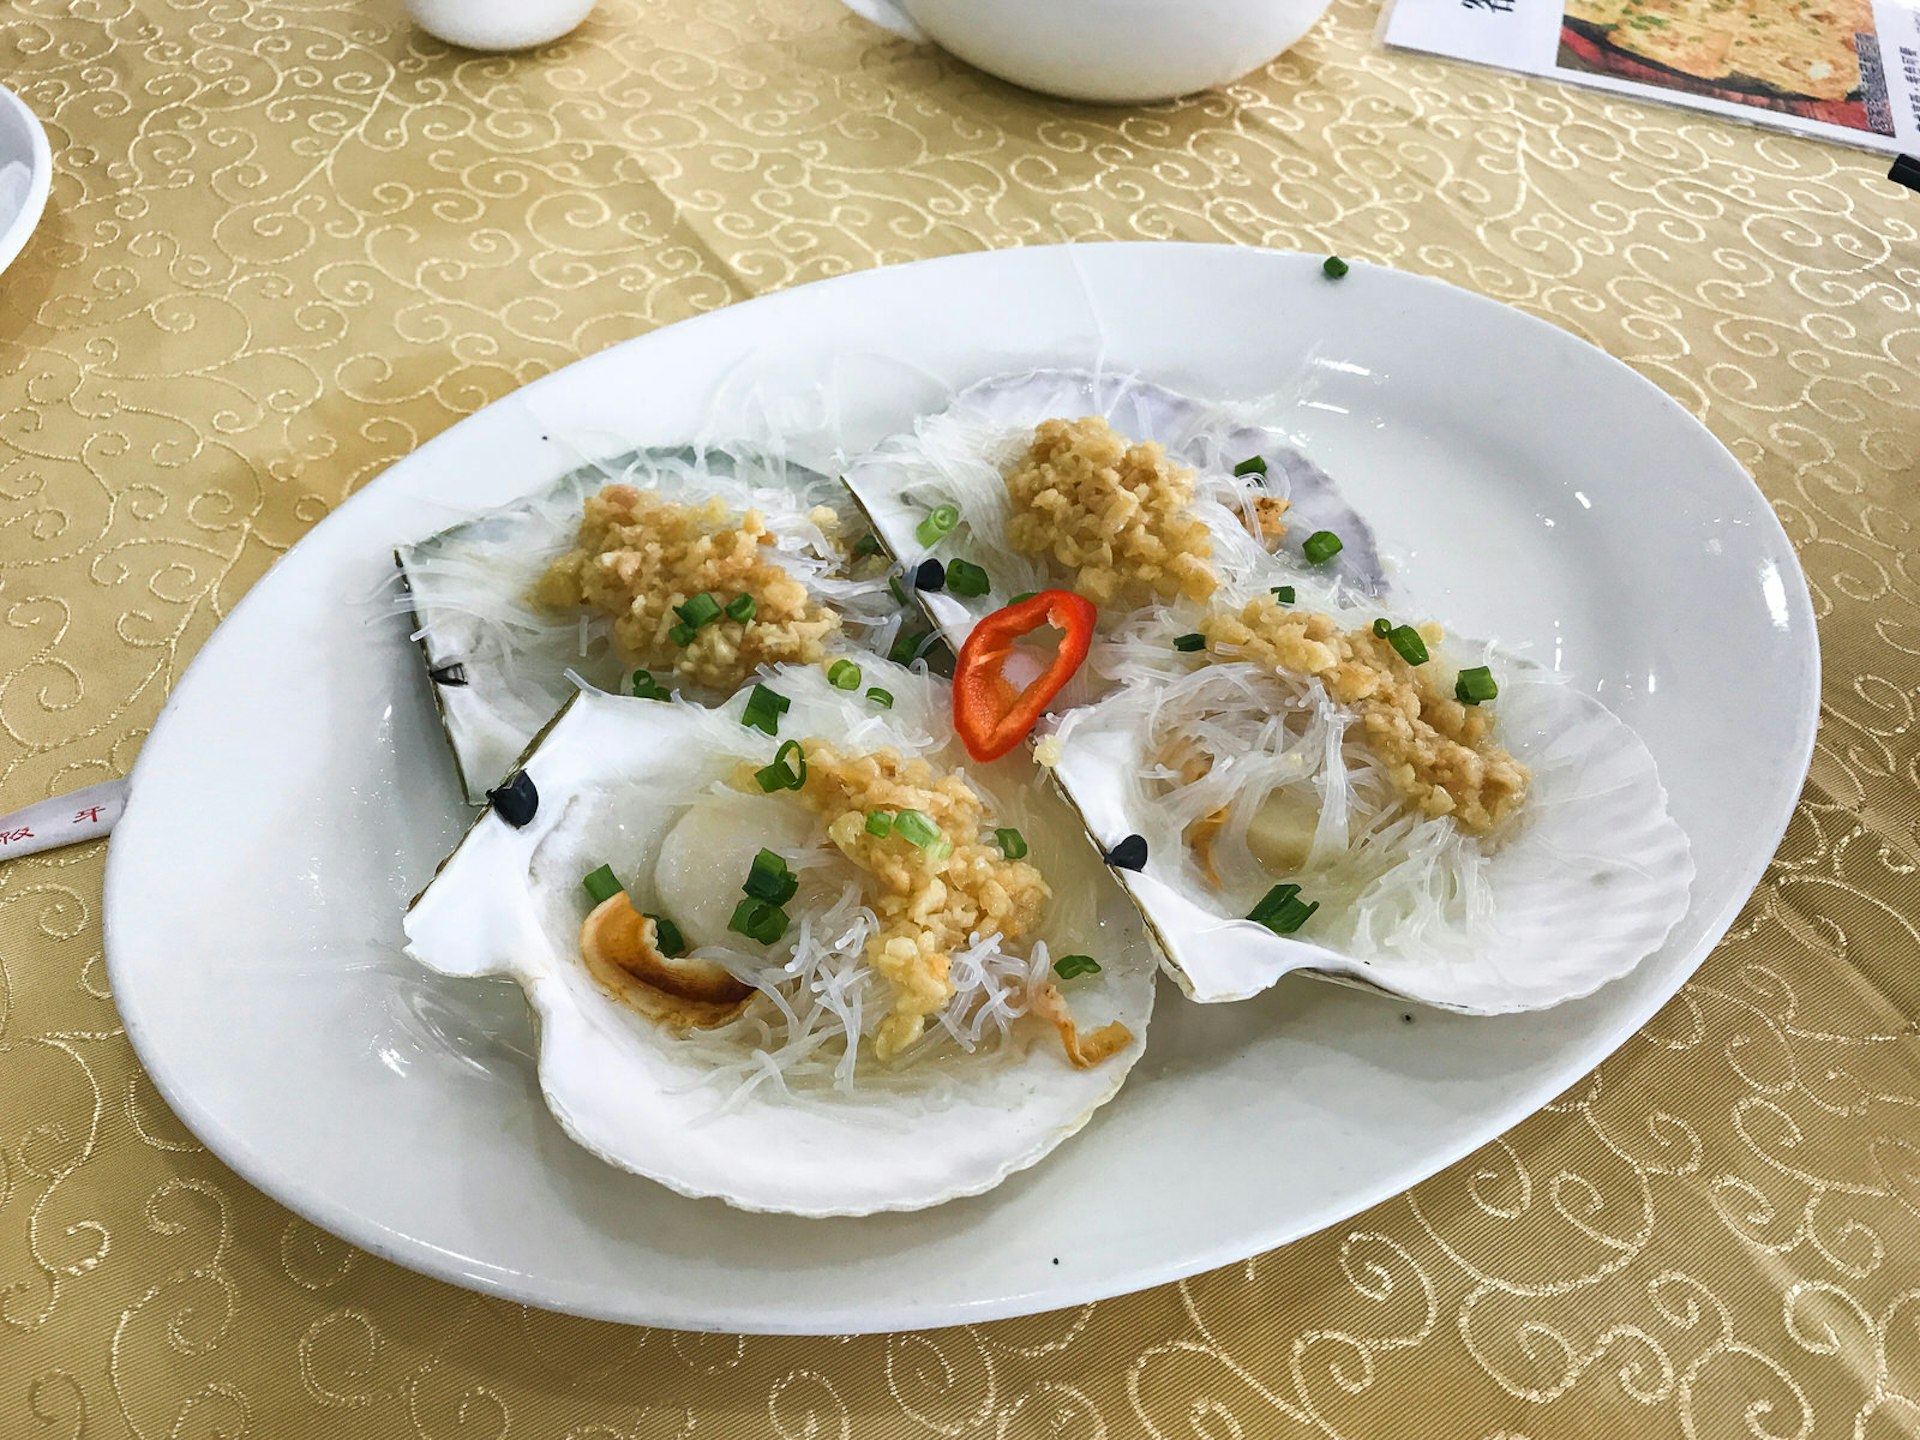 Scallops at Huangsha Seafood Market © Cathy Adams / Lonely Planet